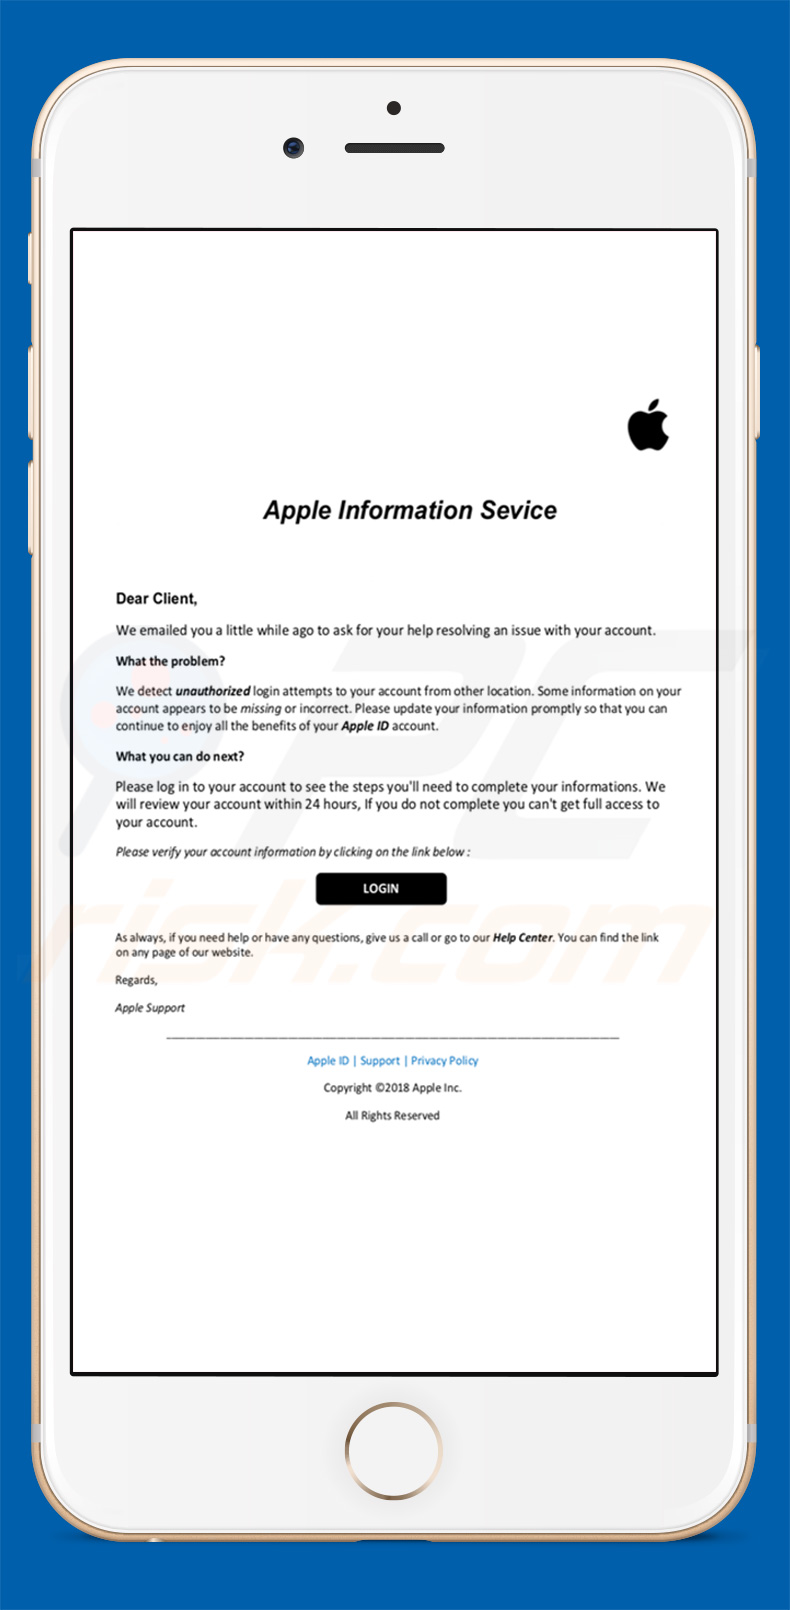 Apple Email Virus stealing accounts